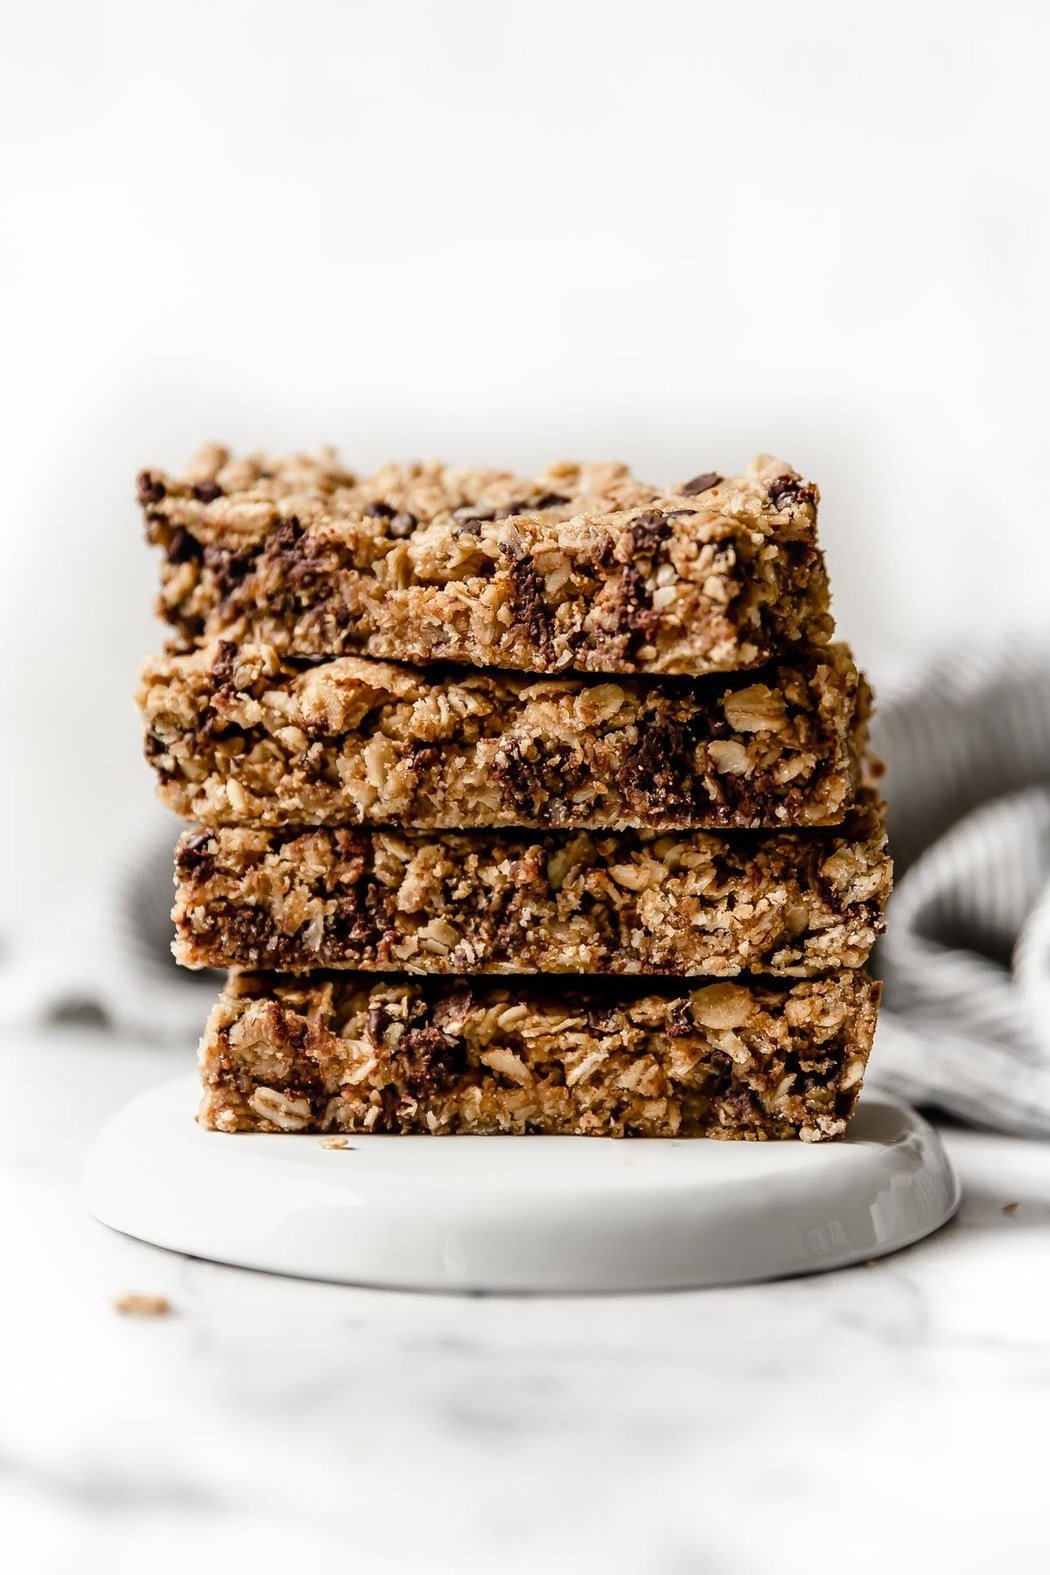 https://therealfooddietitians.com/wp-content/uploads/2020/04/5-Ingredient-Peanut-Butter-Granola-Bars-3.jpg